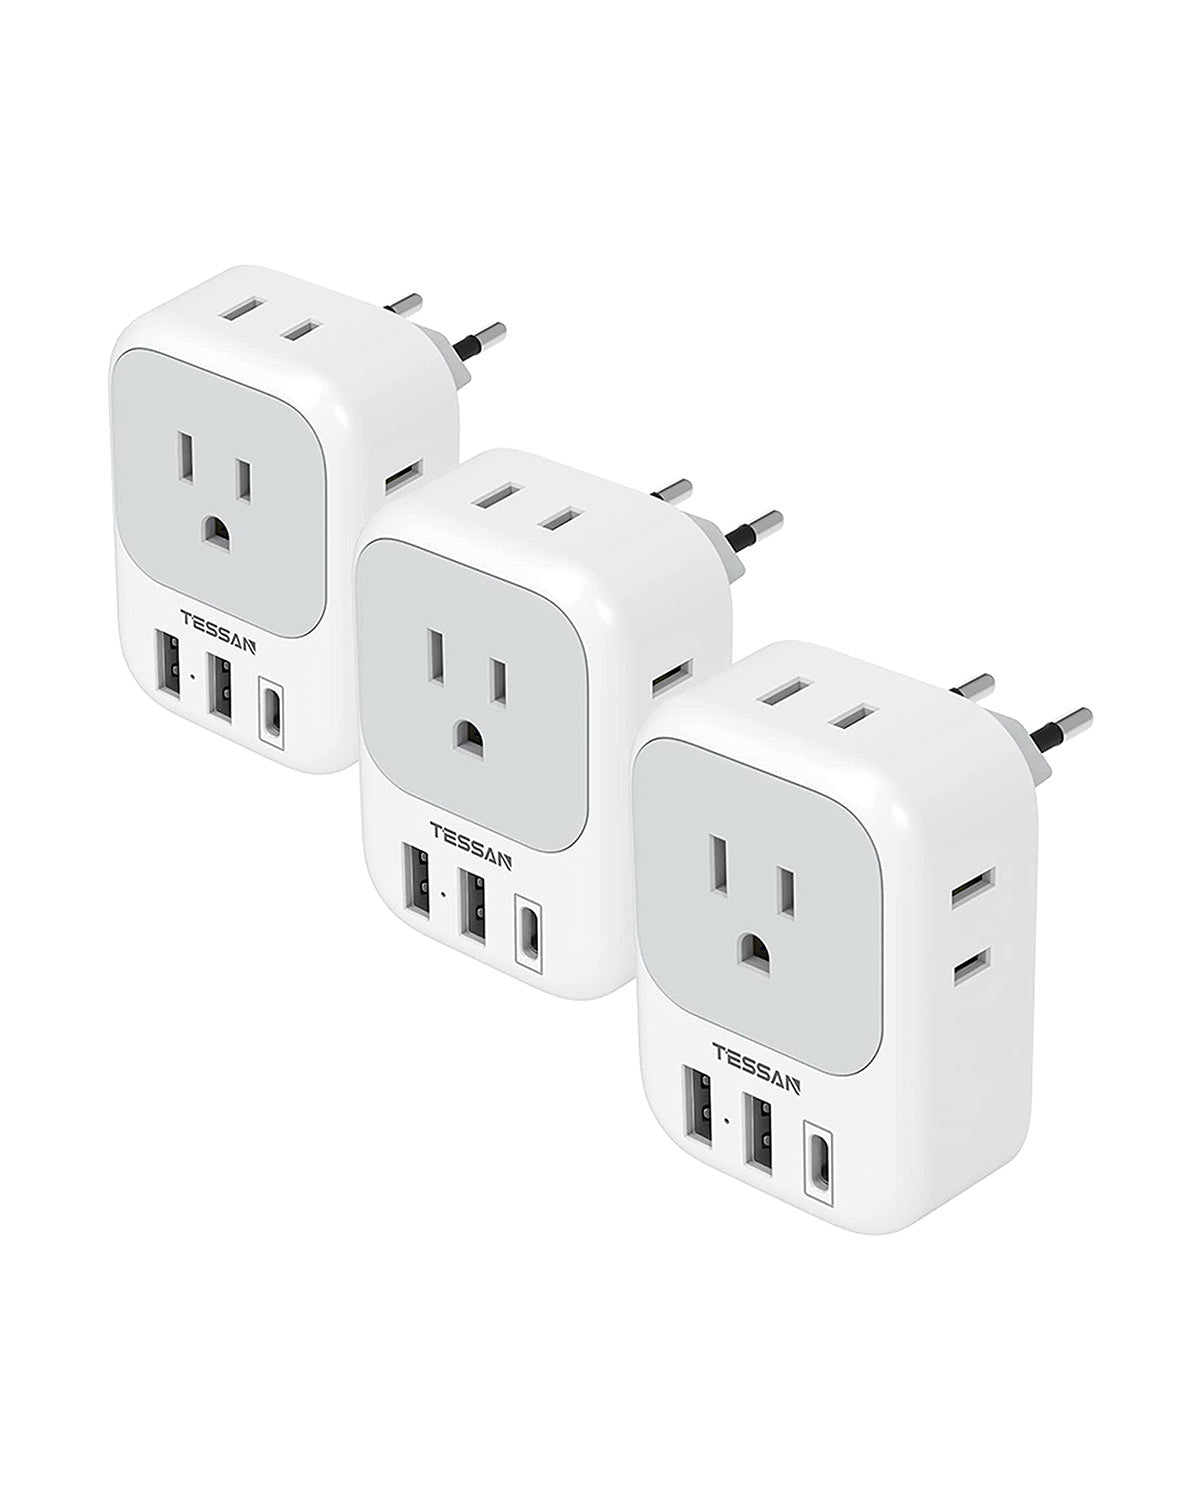 TESSAN US to Europe Power Adapter with 4 AC Outlets and 3 USB (1 USB C), 3 Pack